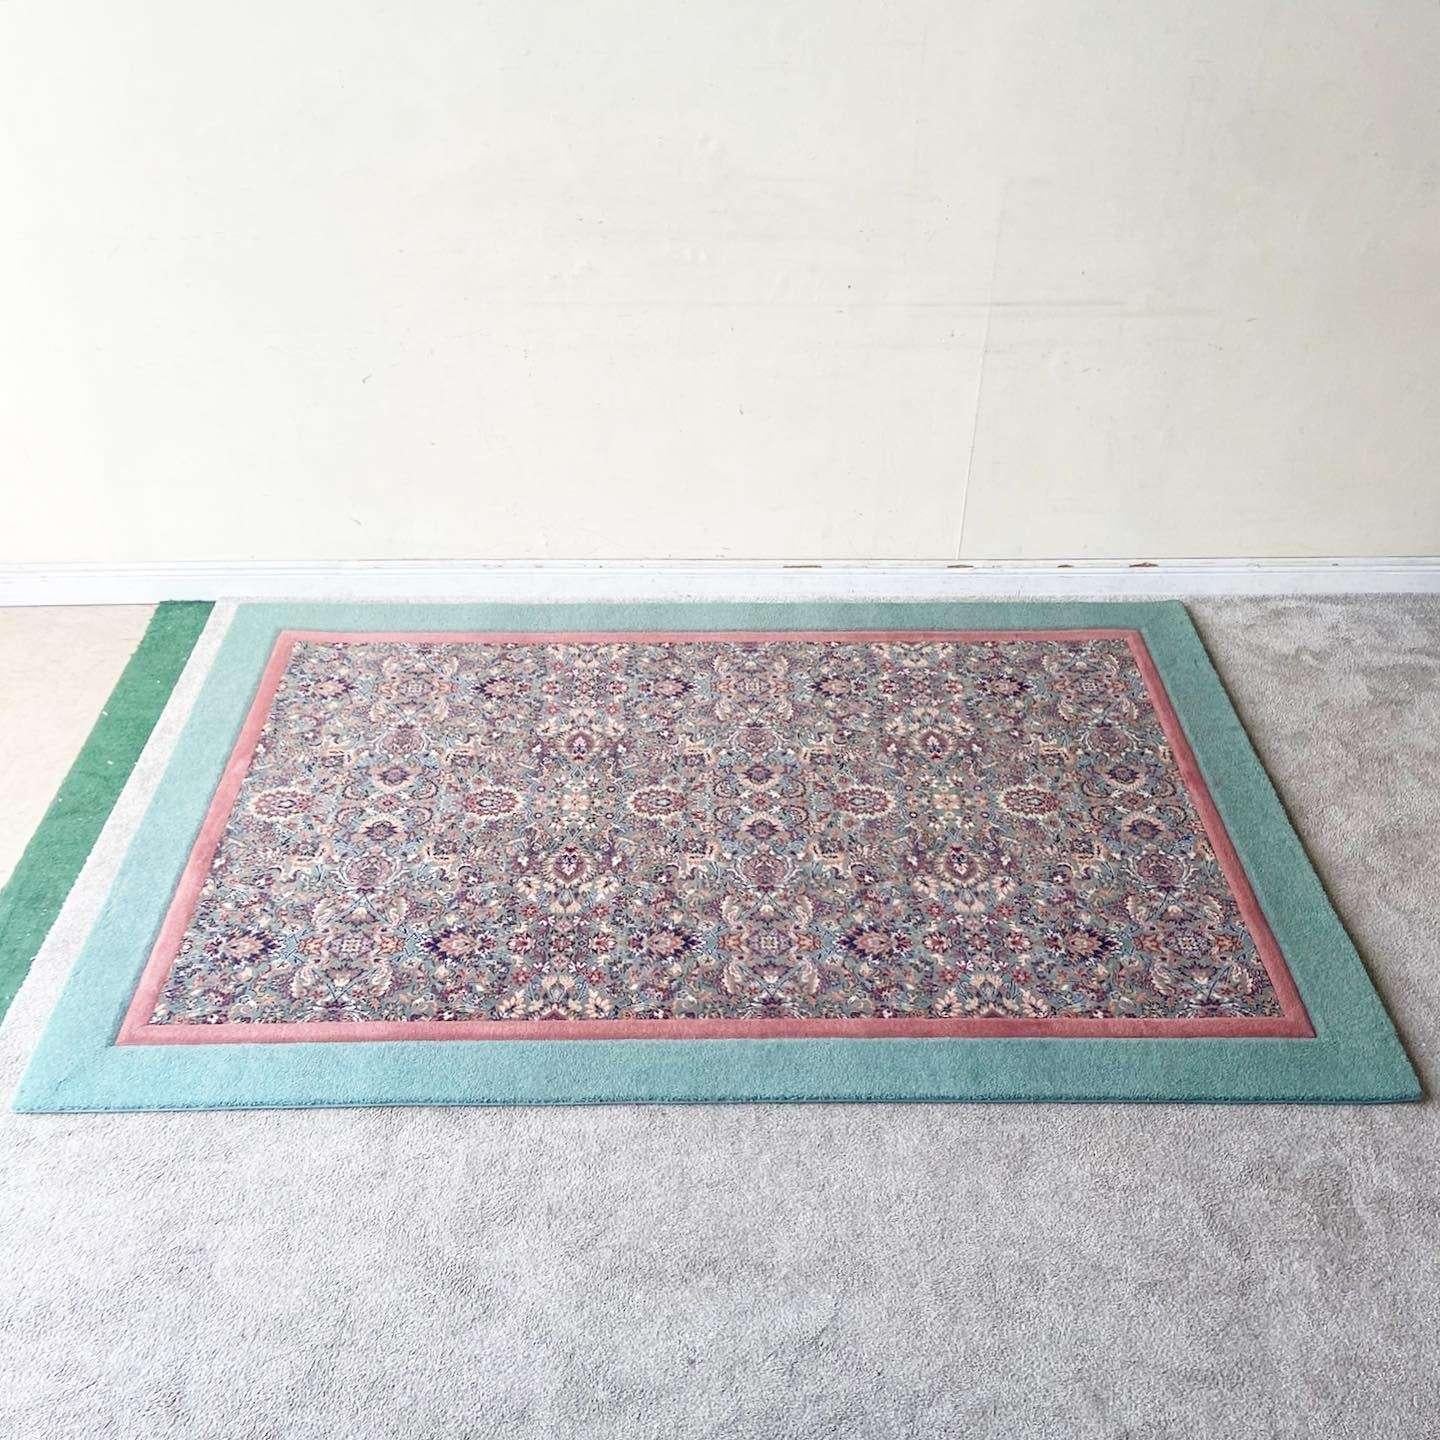 American Post Modern Teal and Pink Rectangular Area Rug For Sale